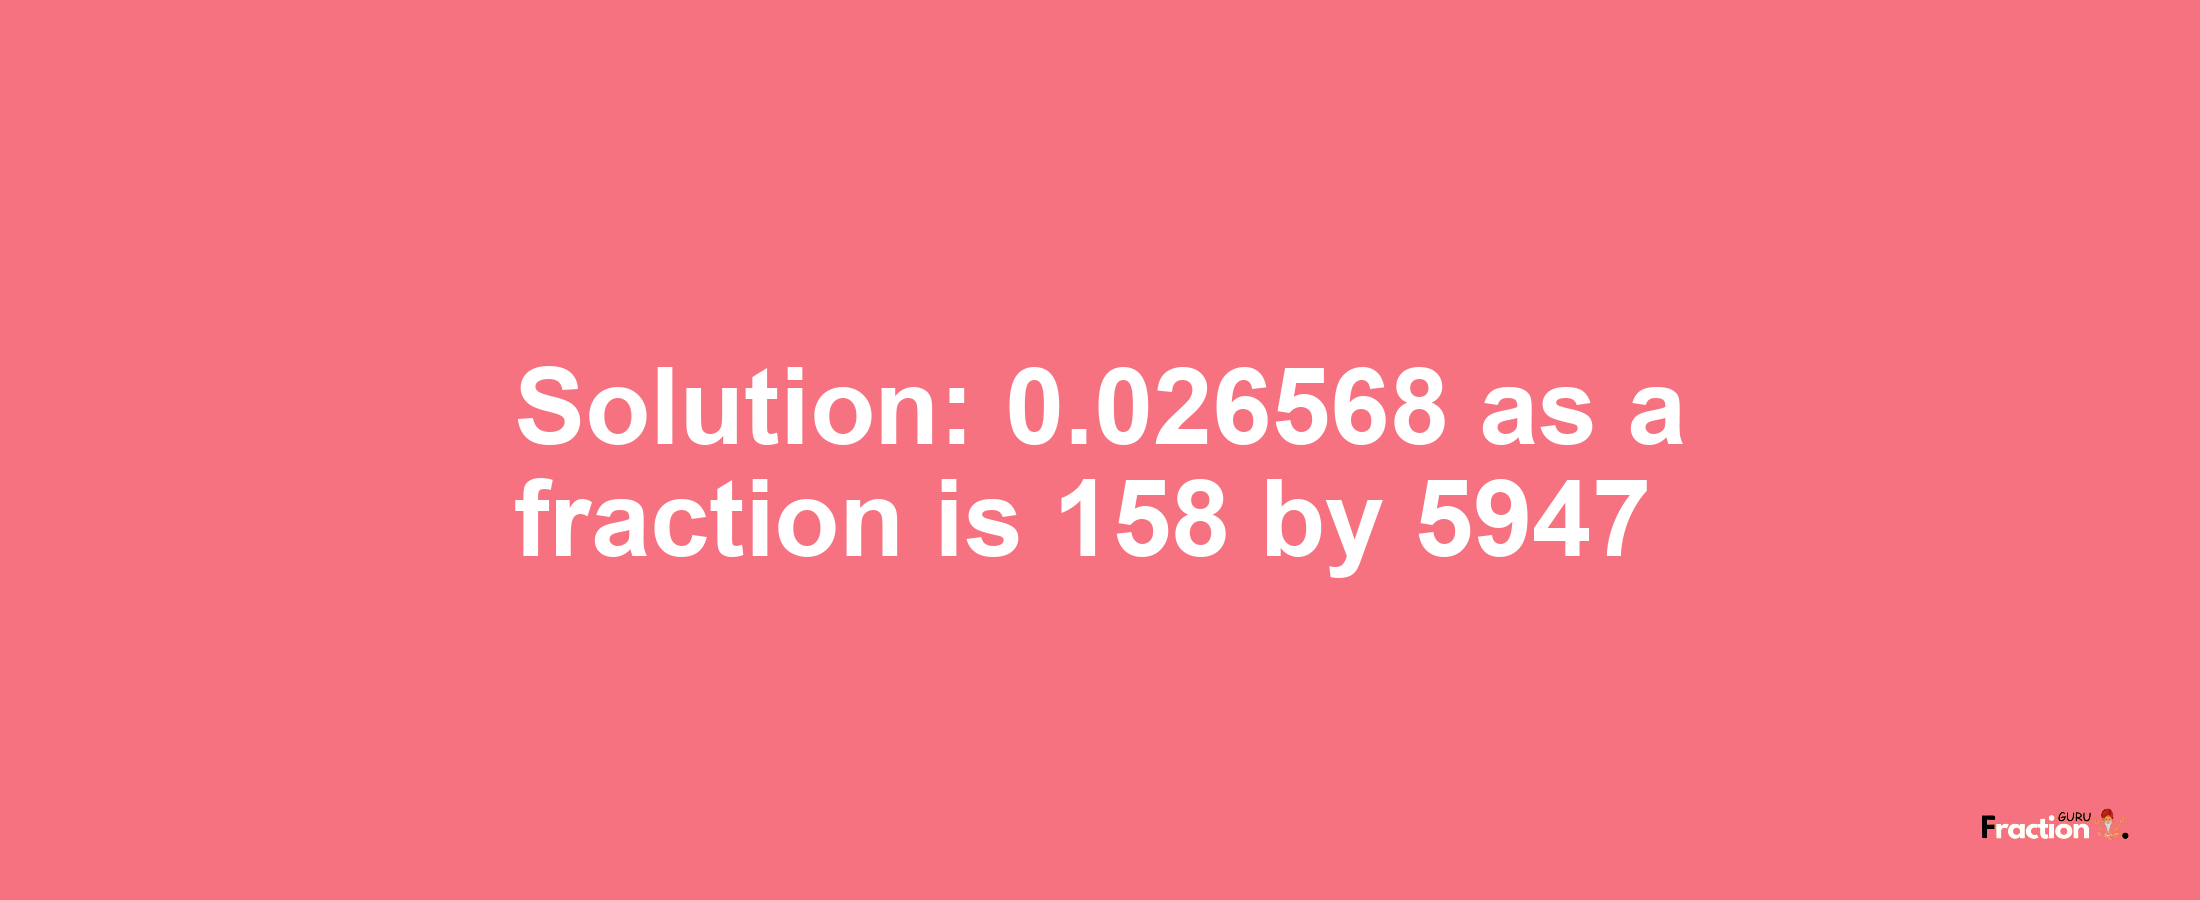 Solution:0.026568 as a fraction is 158/5947